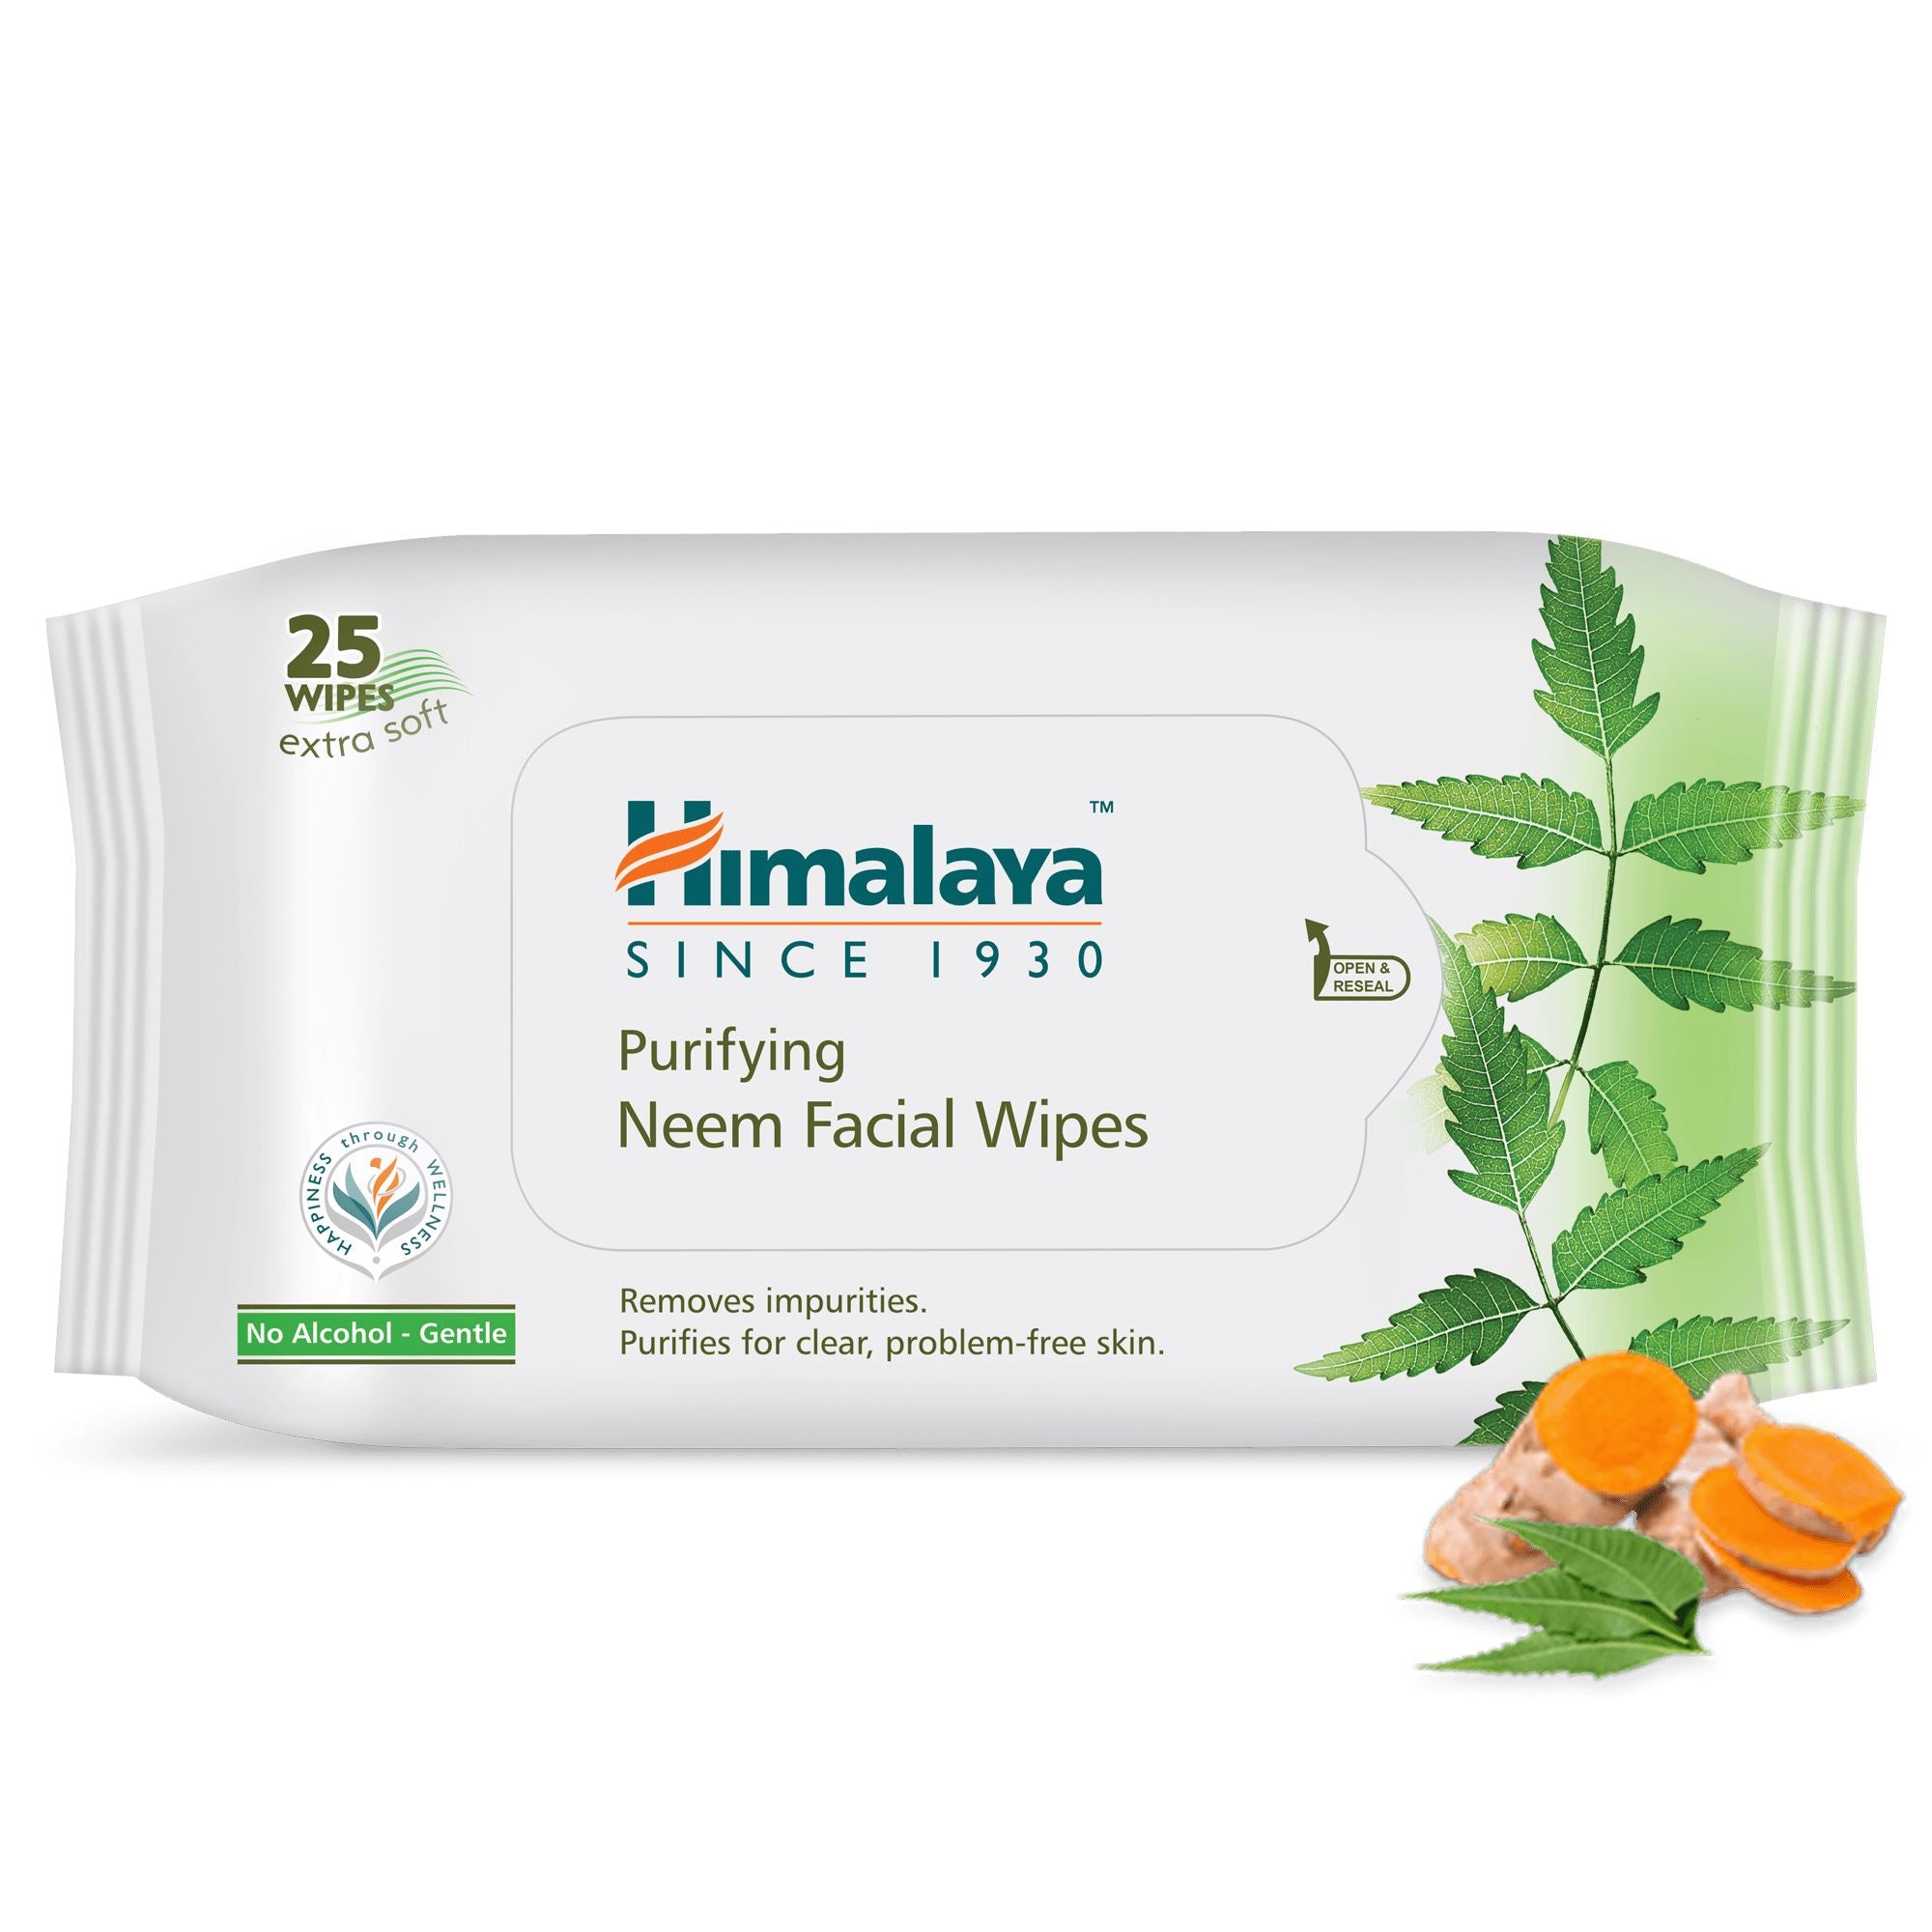 Himalaya Purifying Neem Facial Wipes 25 Count - Purifies for clear, problems-free skin